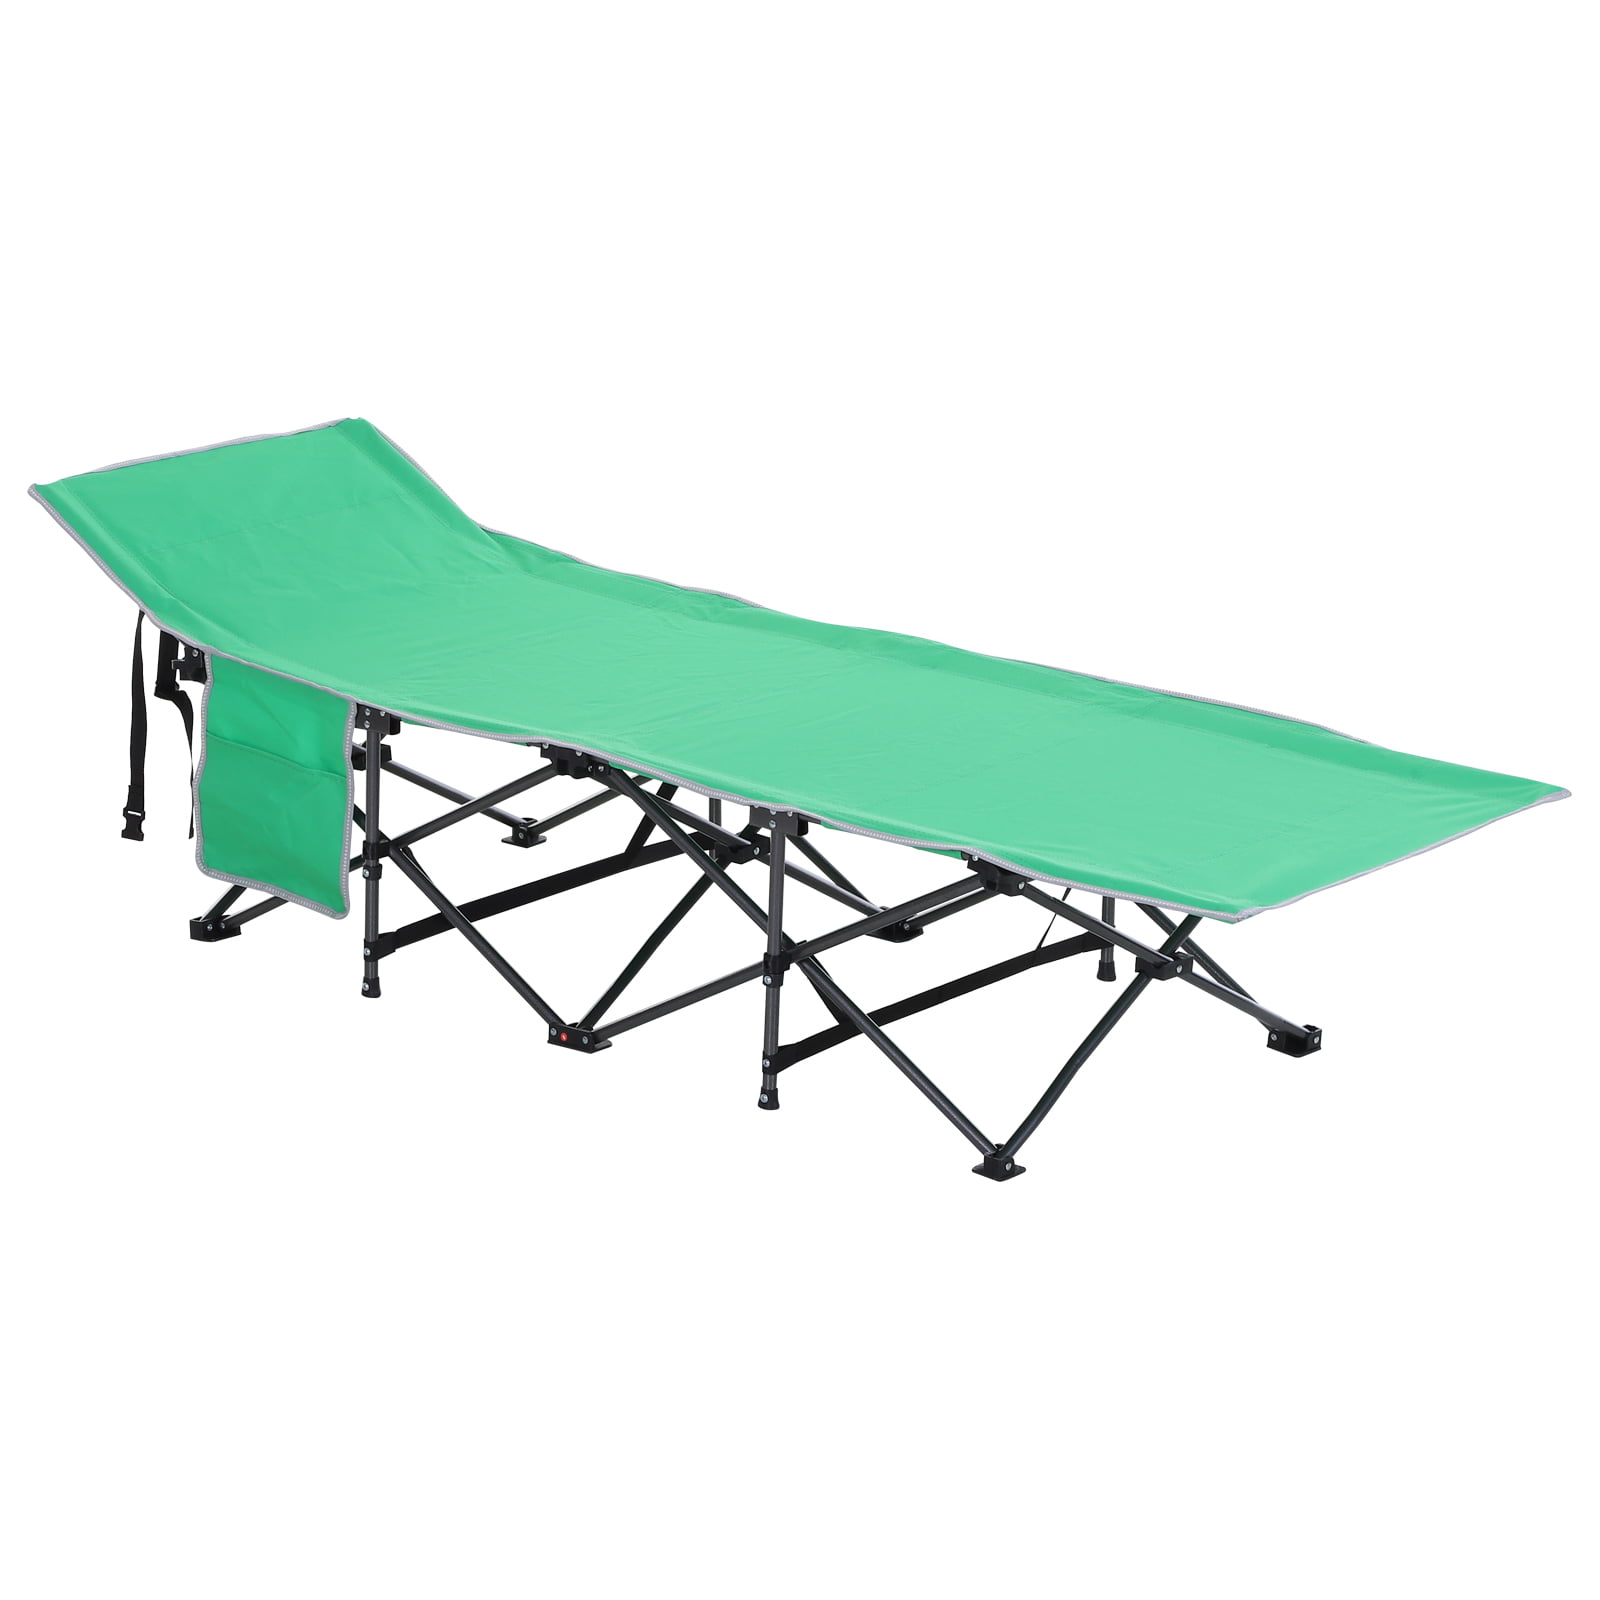 Military cots Travel cots and Folding Cots Keeps Your Sleeping Pad Secure! Fitted Camping Cot Sheet for Adult Sleeping Cots Camping Bedding That fits Most Army cots Great for Hunting 